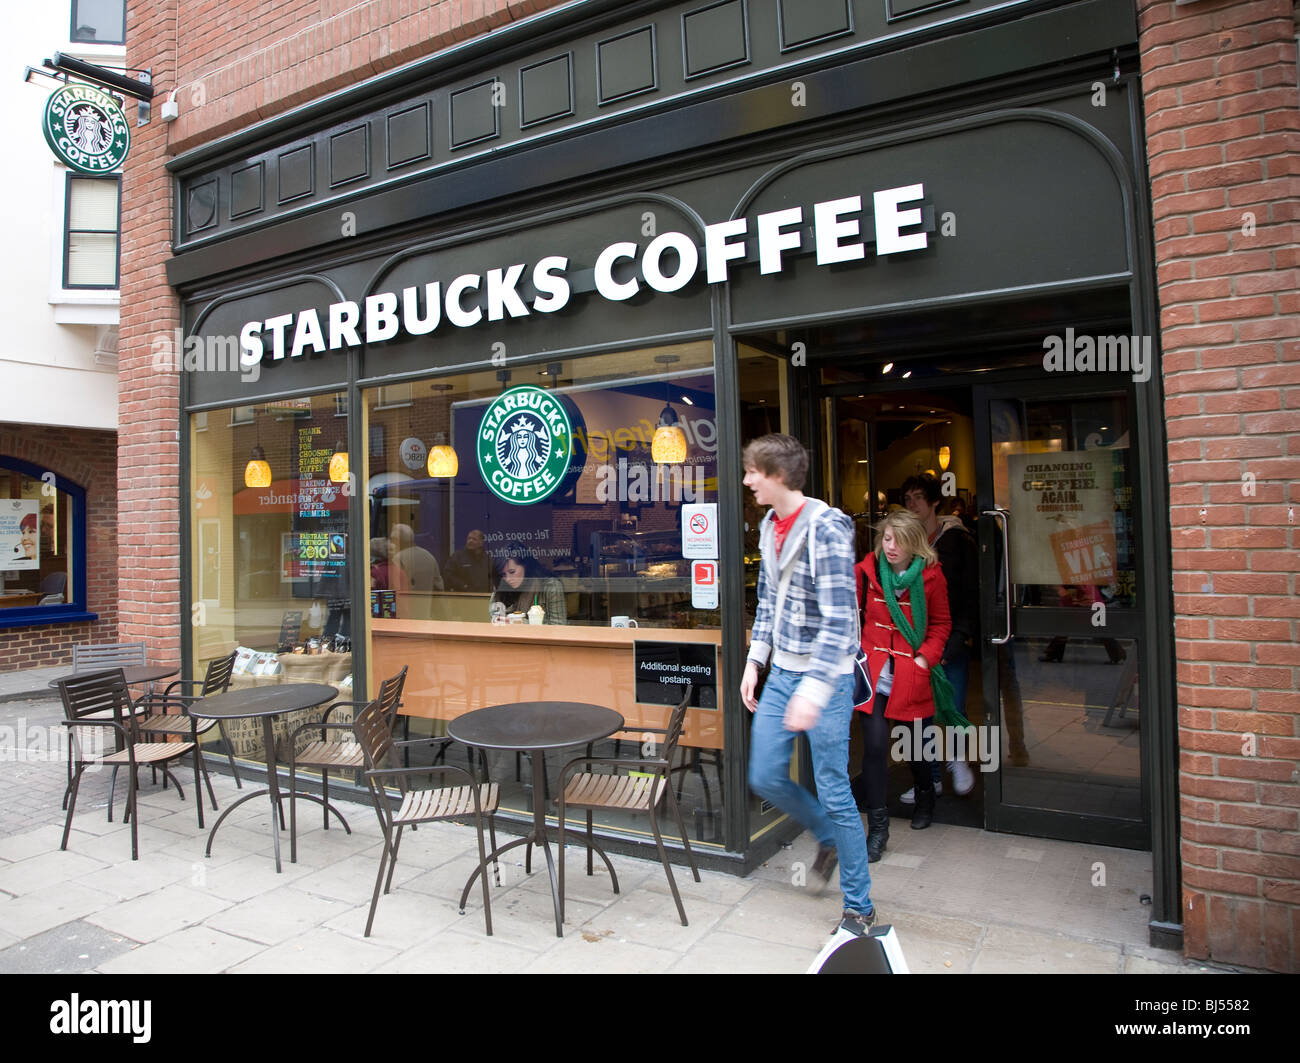 Starbucks coffee shop young people leaving Stock Photo